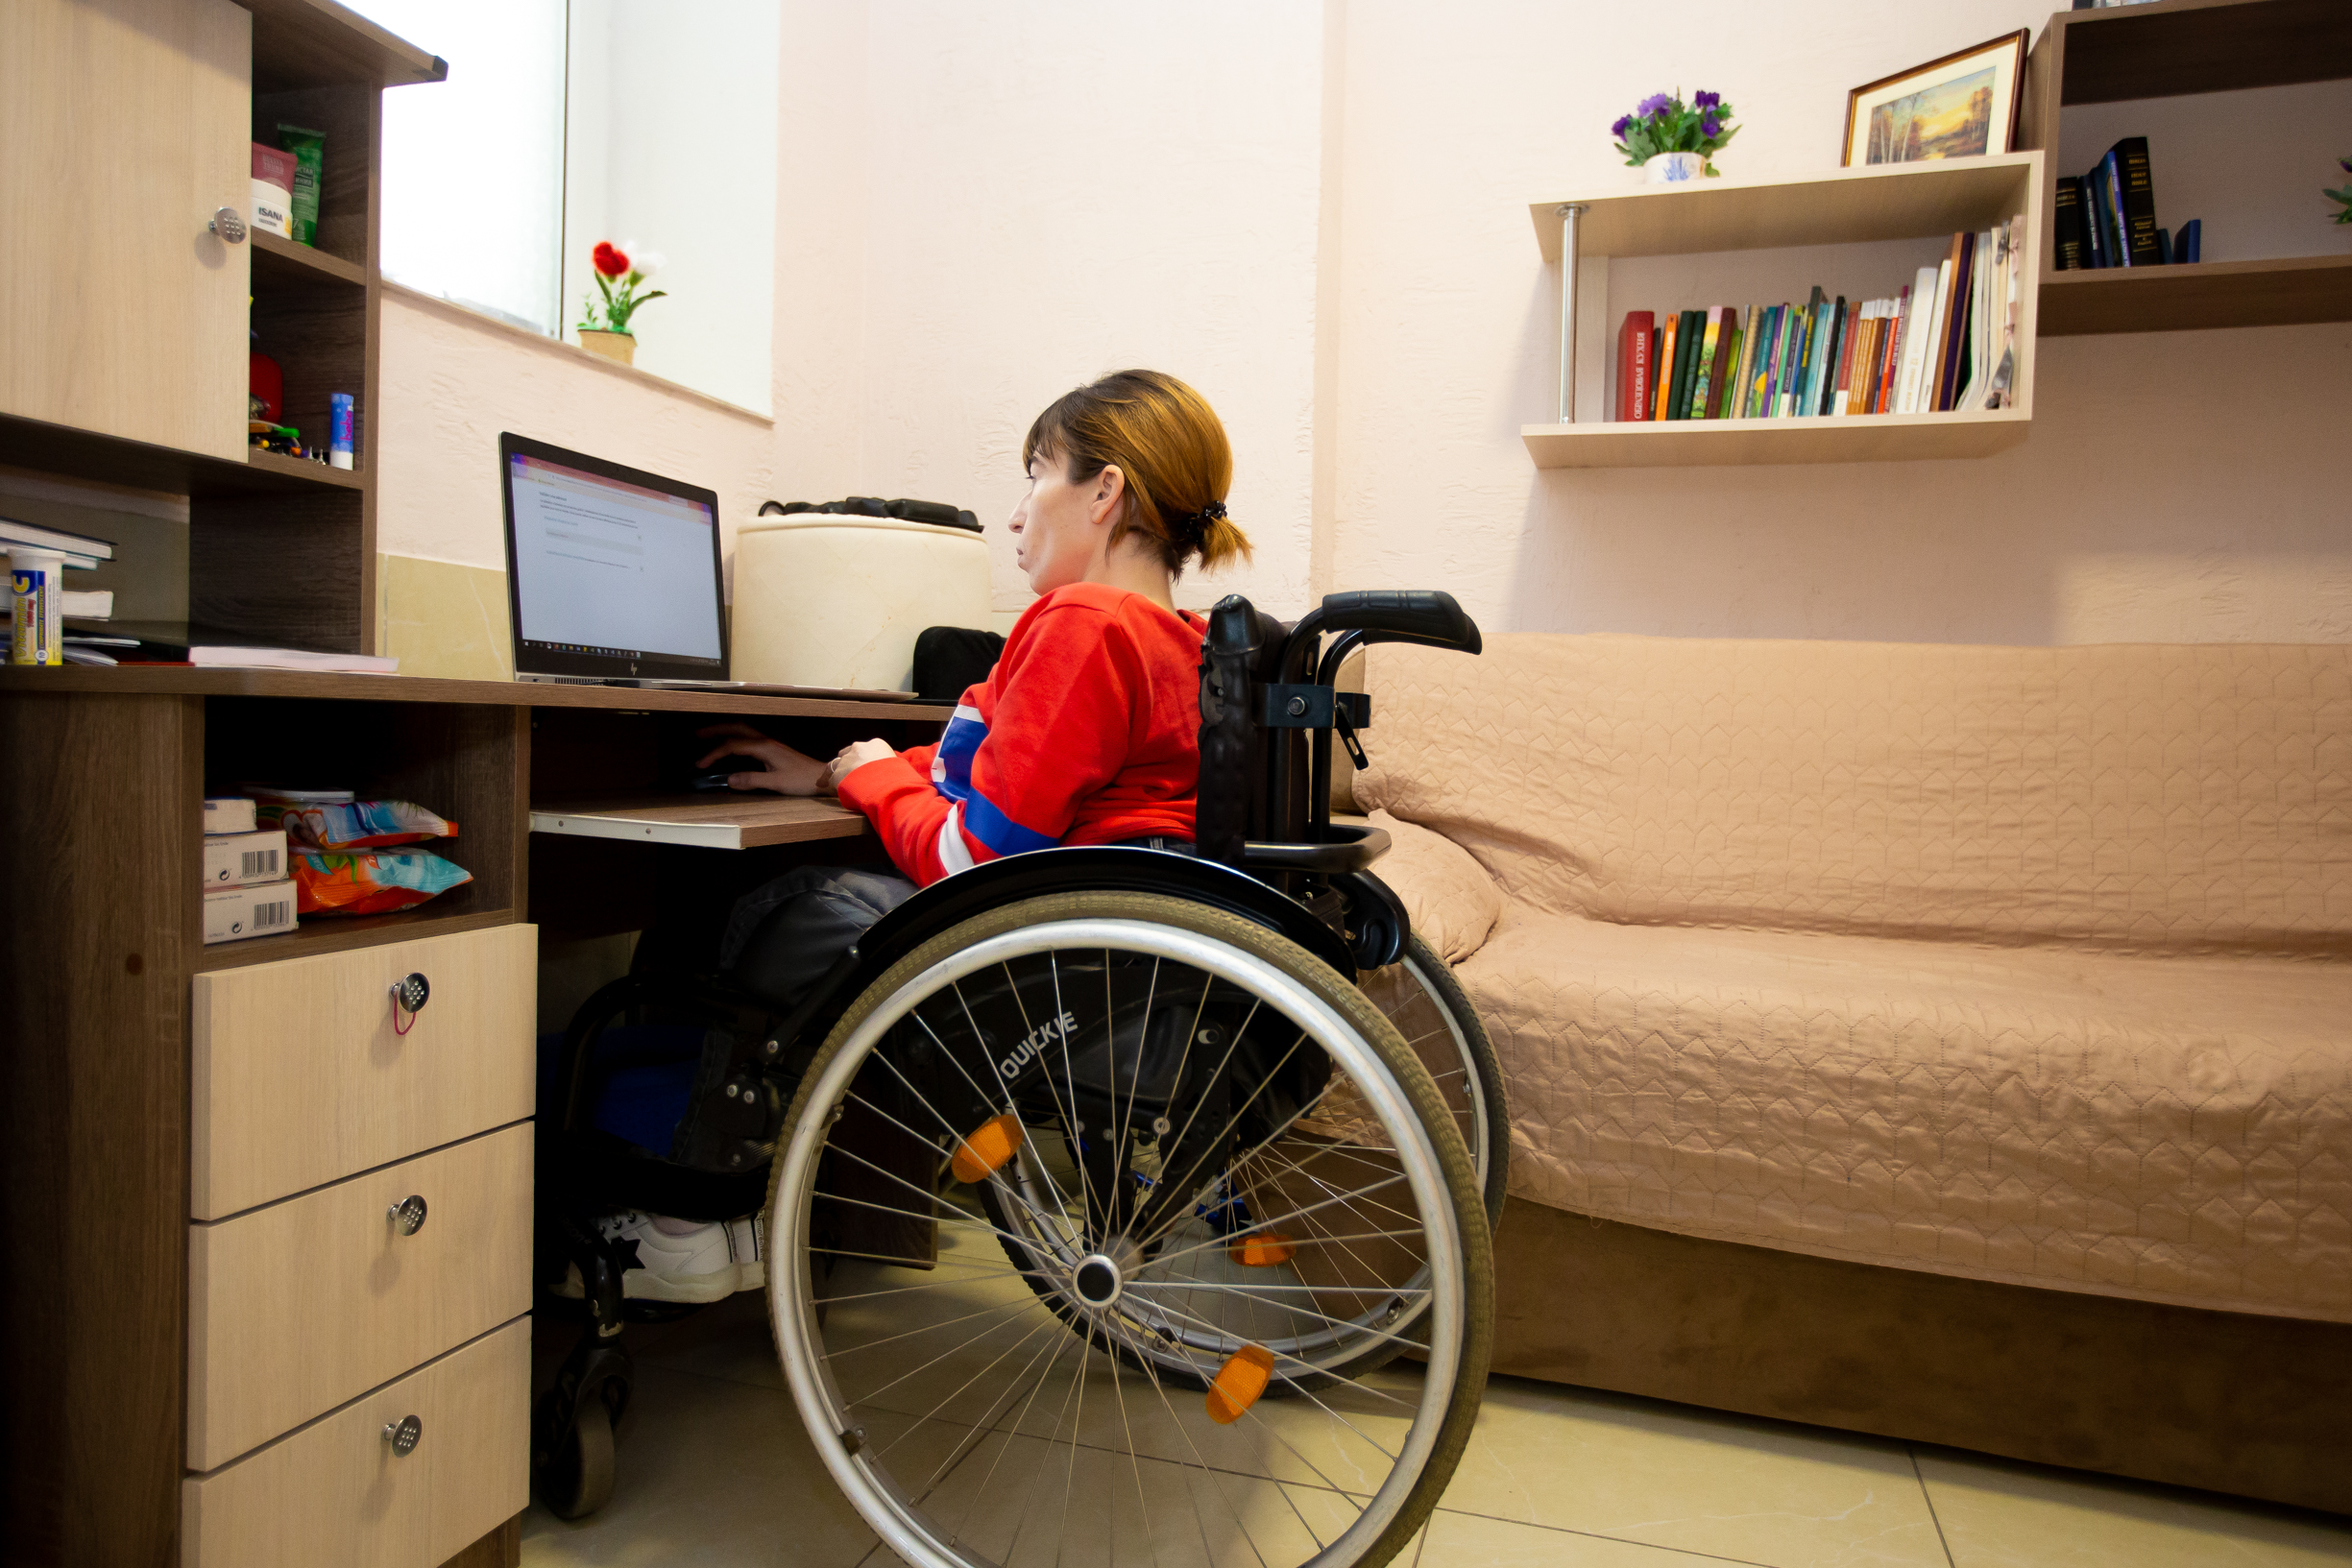 A woman wearing a red shirt and using a wheelchair sits at a desk in her home.